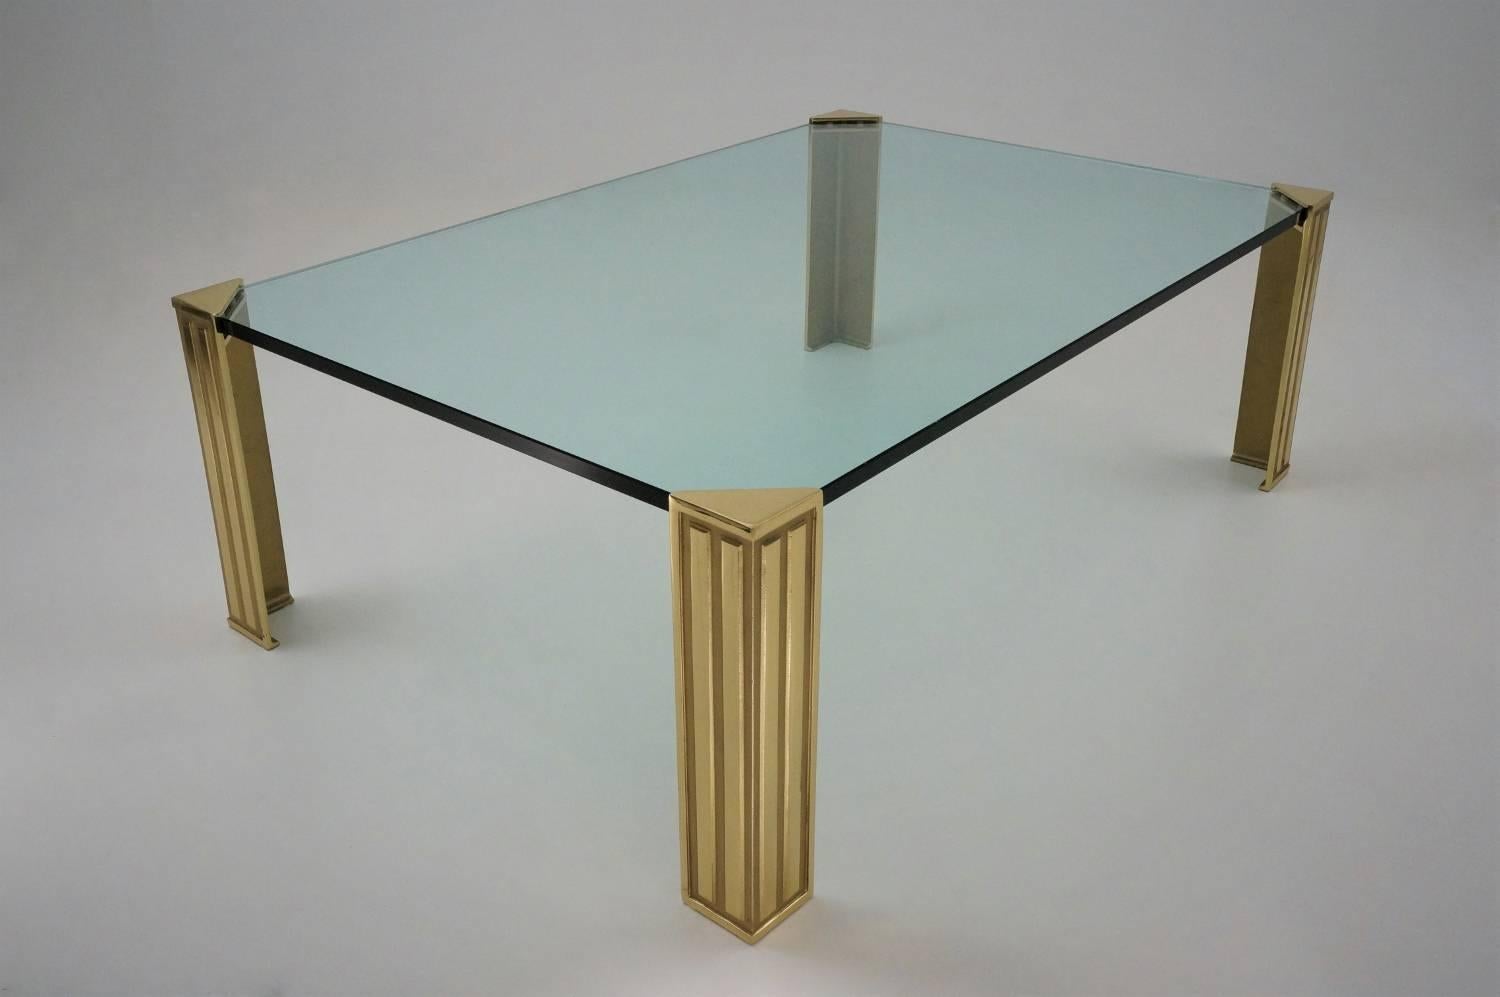 Peter Ghyczy coffee table, frameless design with brass legs and quality glass top, circa 1990s, Dutch.

This coffee table has been gently cleaned while respecting the vintage patina, it is ready to use.

Peter Ghyczy is one of the pioneers of